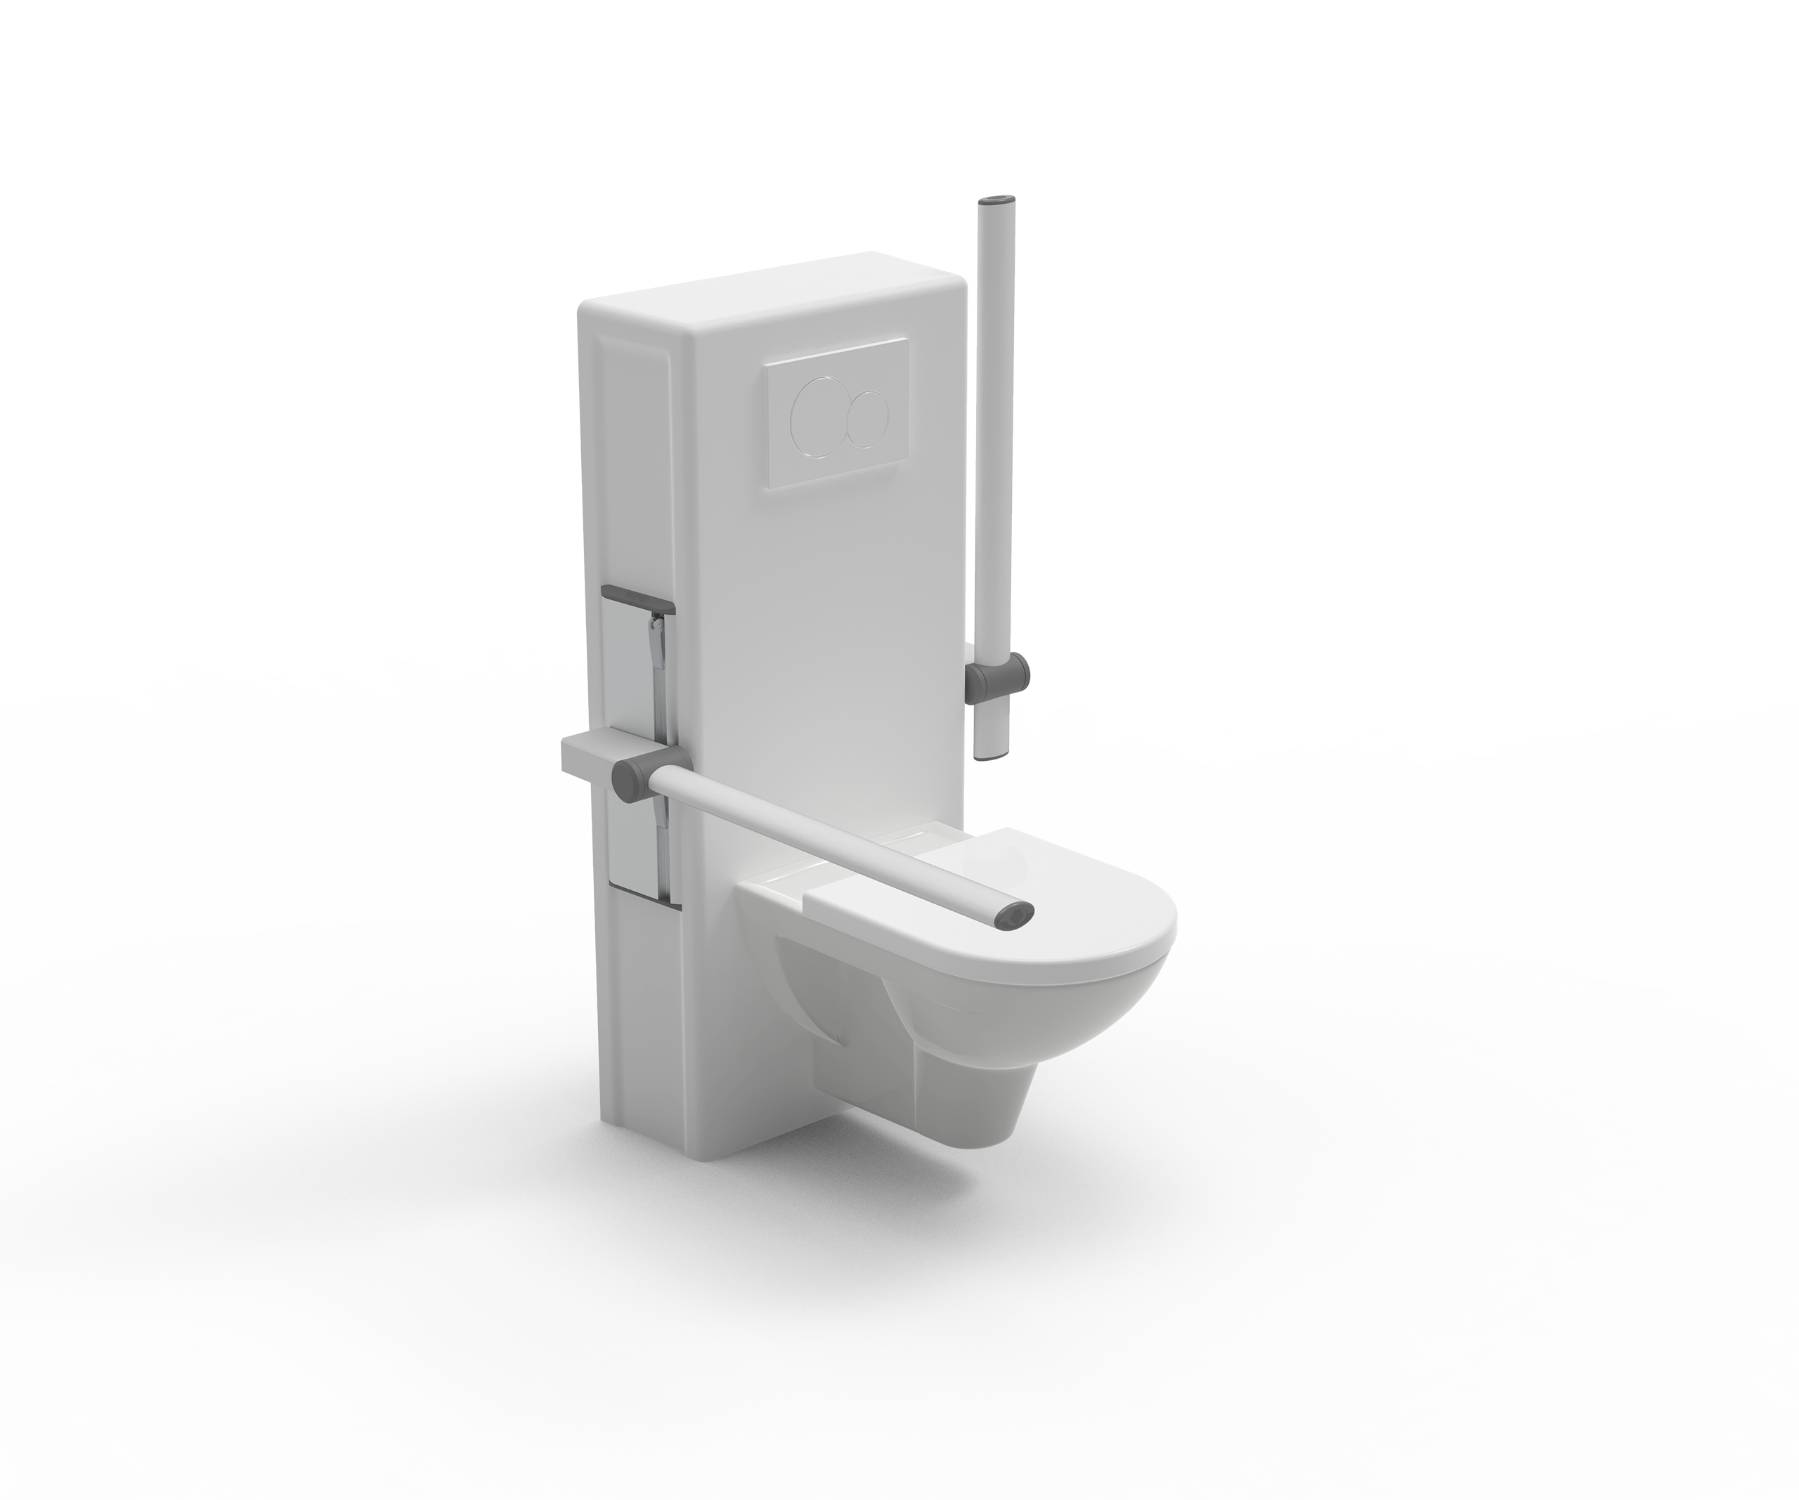 Ropox Electrical Toilet Lifter